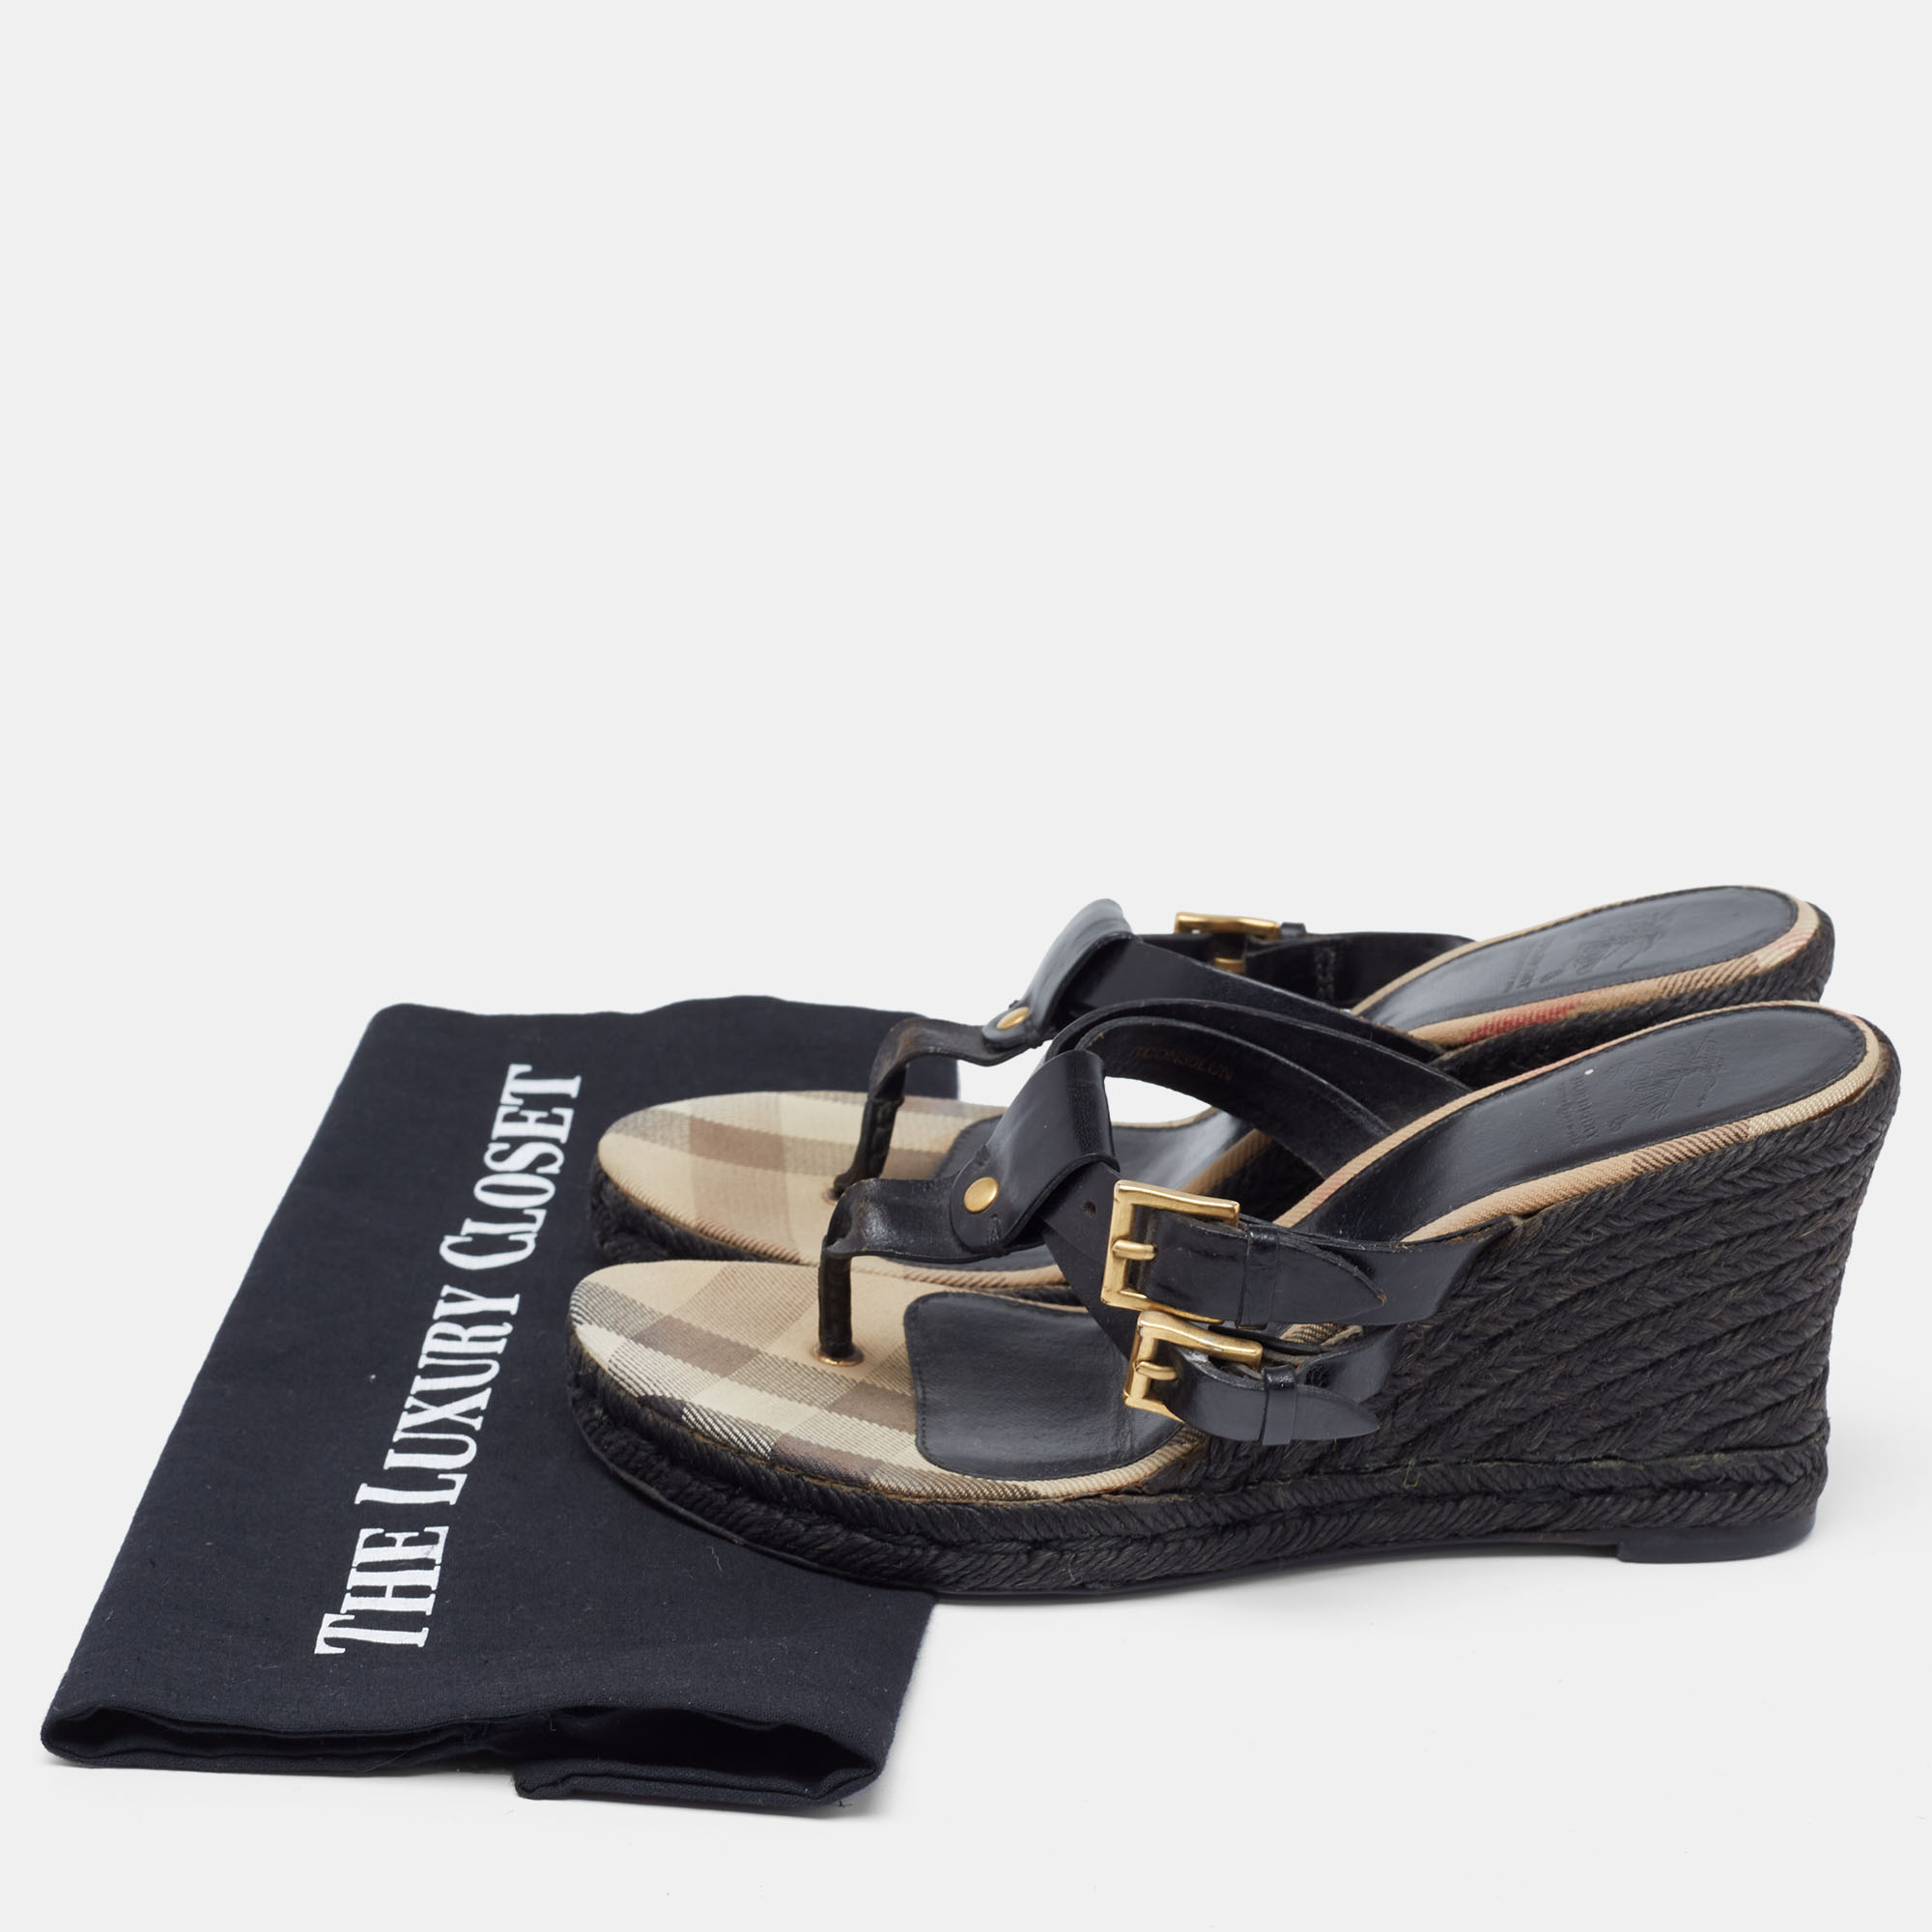 Burberry Black Leather Wedge Espadrille Thong Slide Sandals Size 39